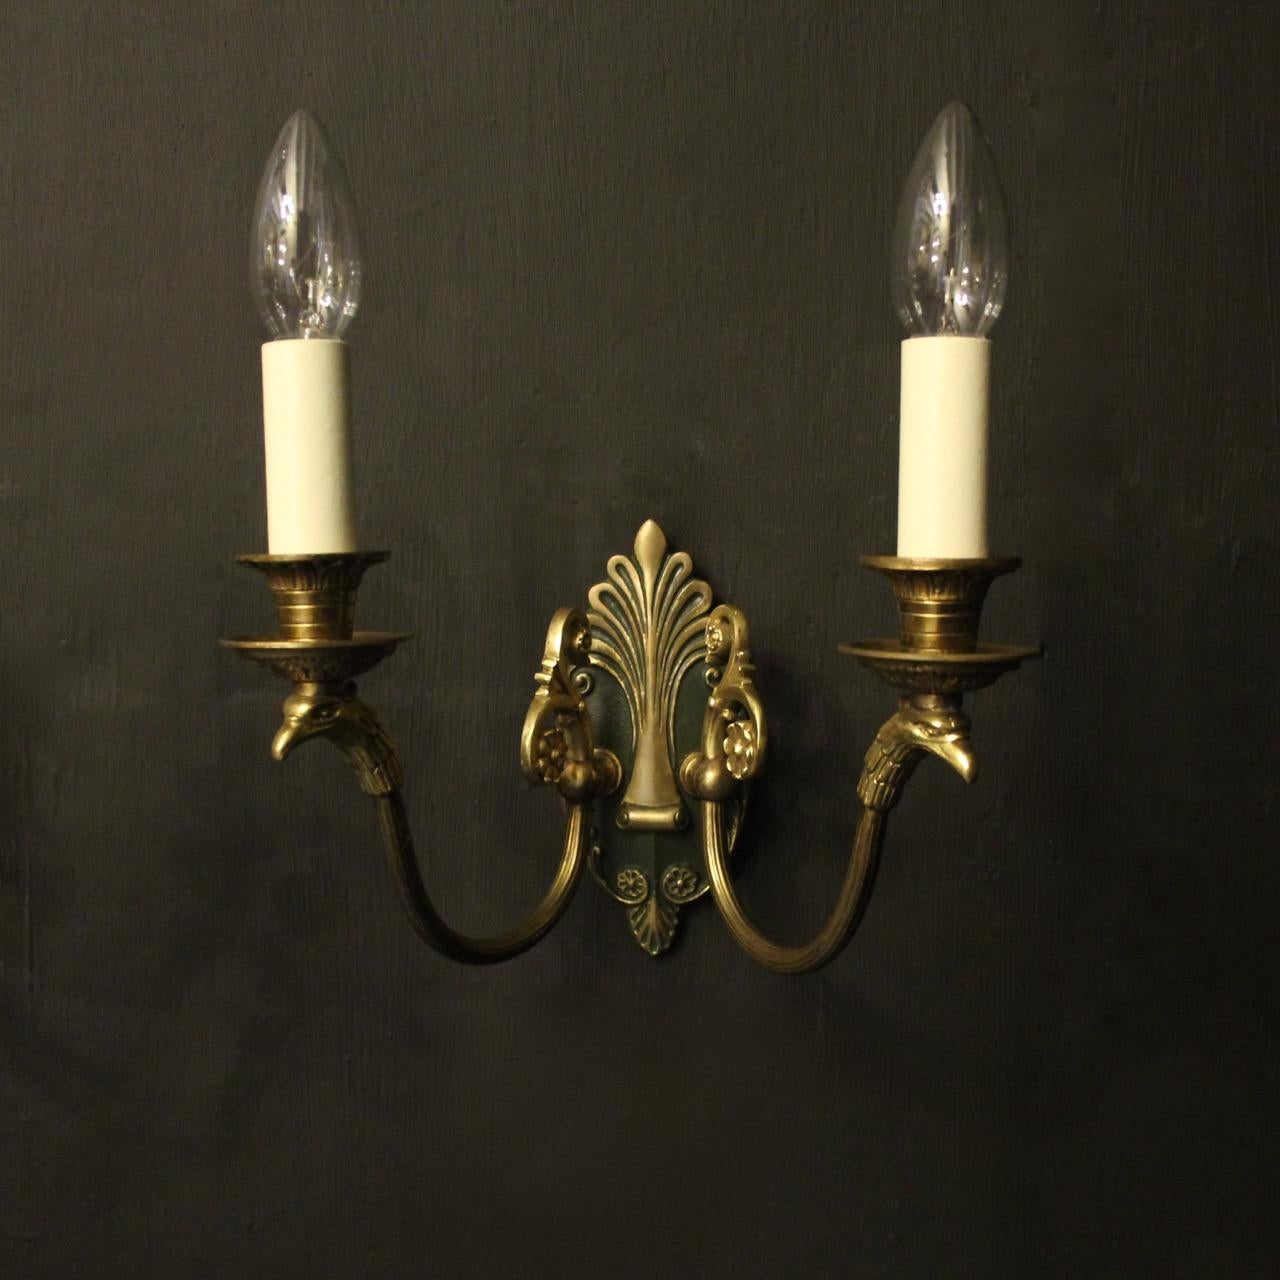 A French pair of Empire gilded bronze twin arm antique wall lights, the eagle headed reeded scrolling arms with circular bobeche drip pans and etched candle sconces, issuing from a central decorative dark green enameled backplate with Anthemion